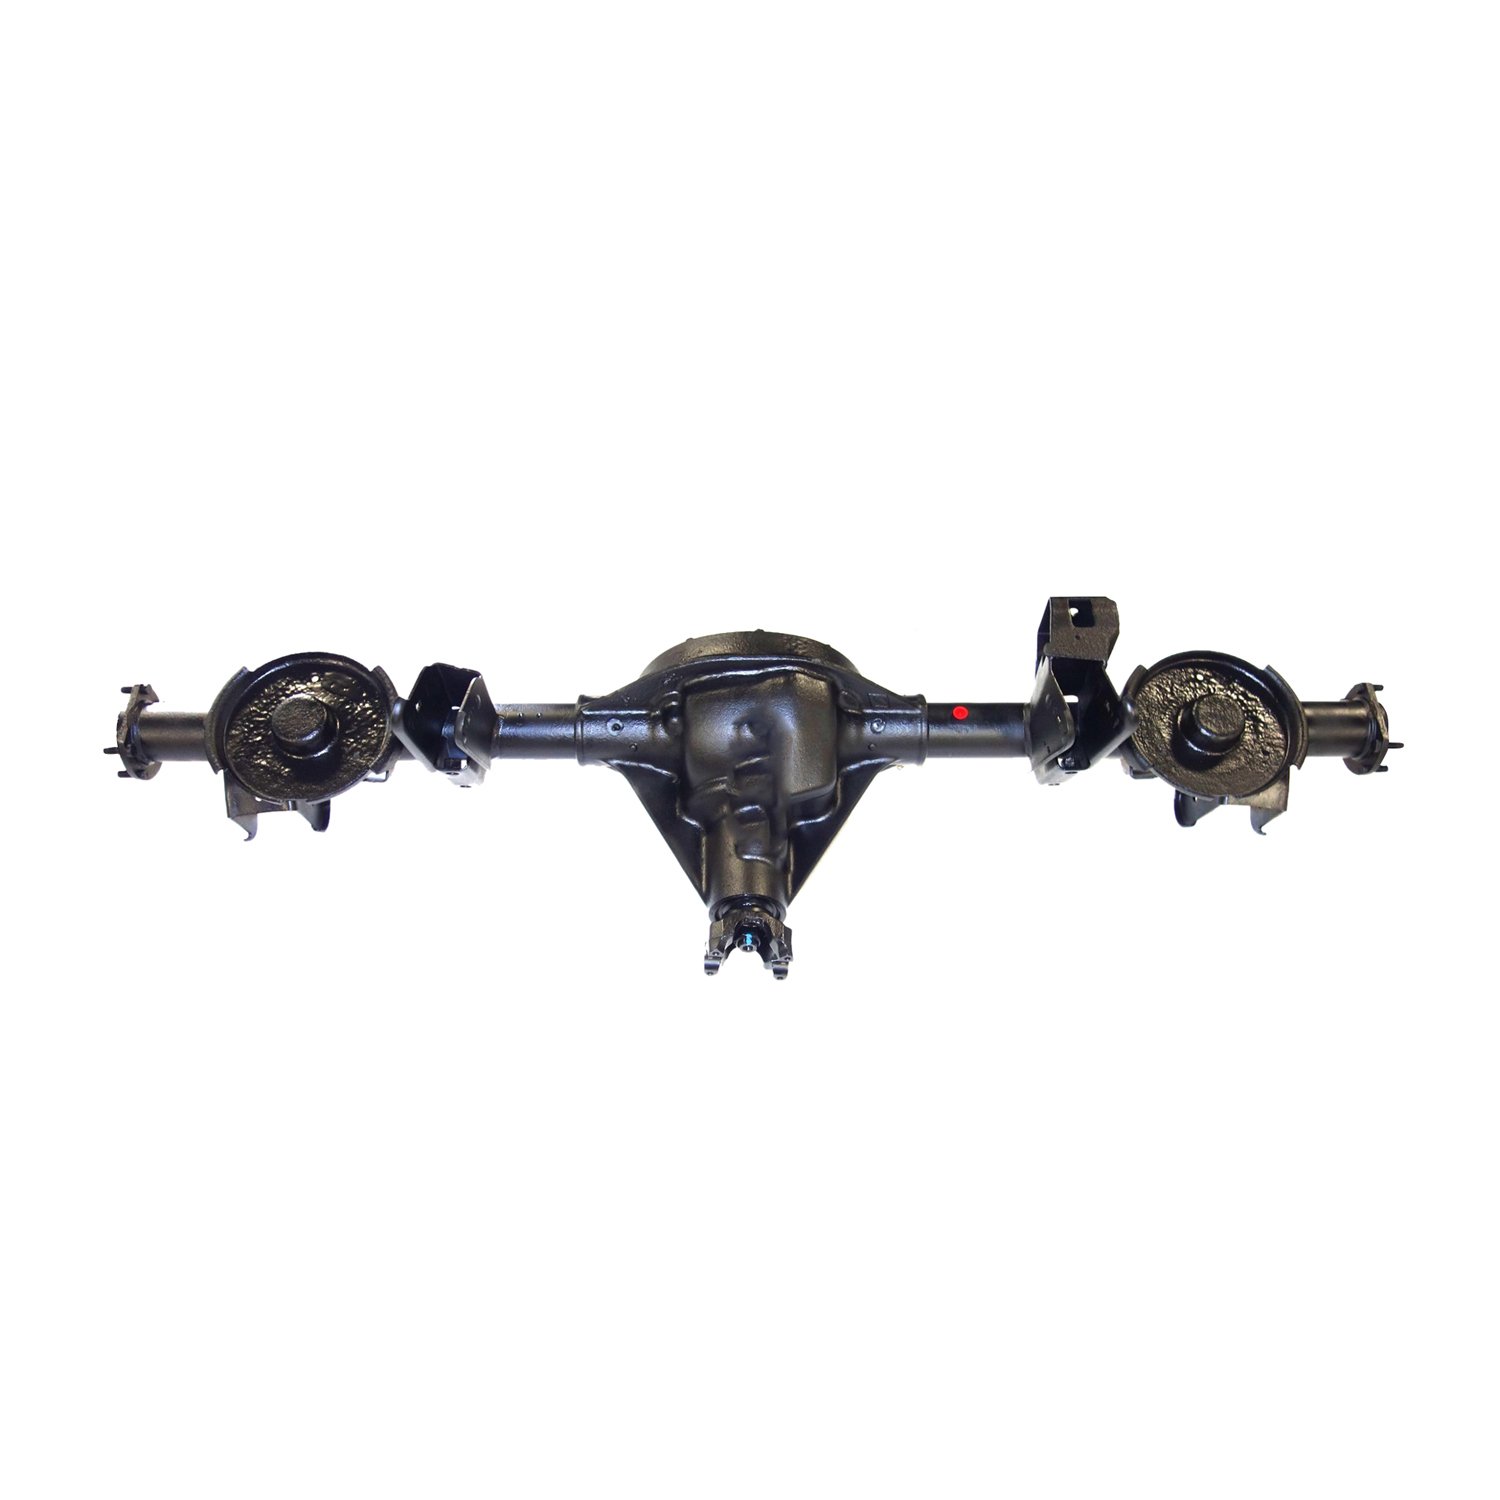 Remanufactured Complete Axle Assembly for Dana 35 03-05 Wrangler 3.73 w/o ABS, Posi LSD